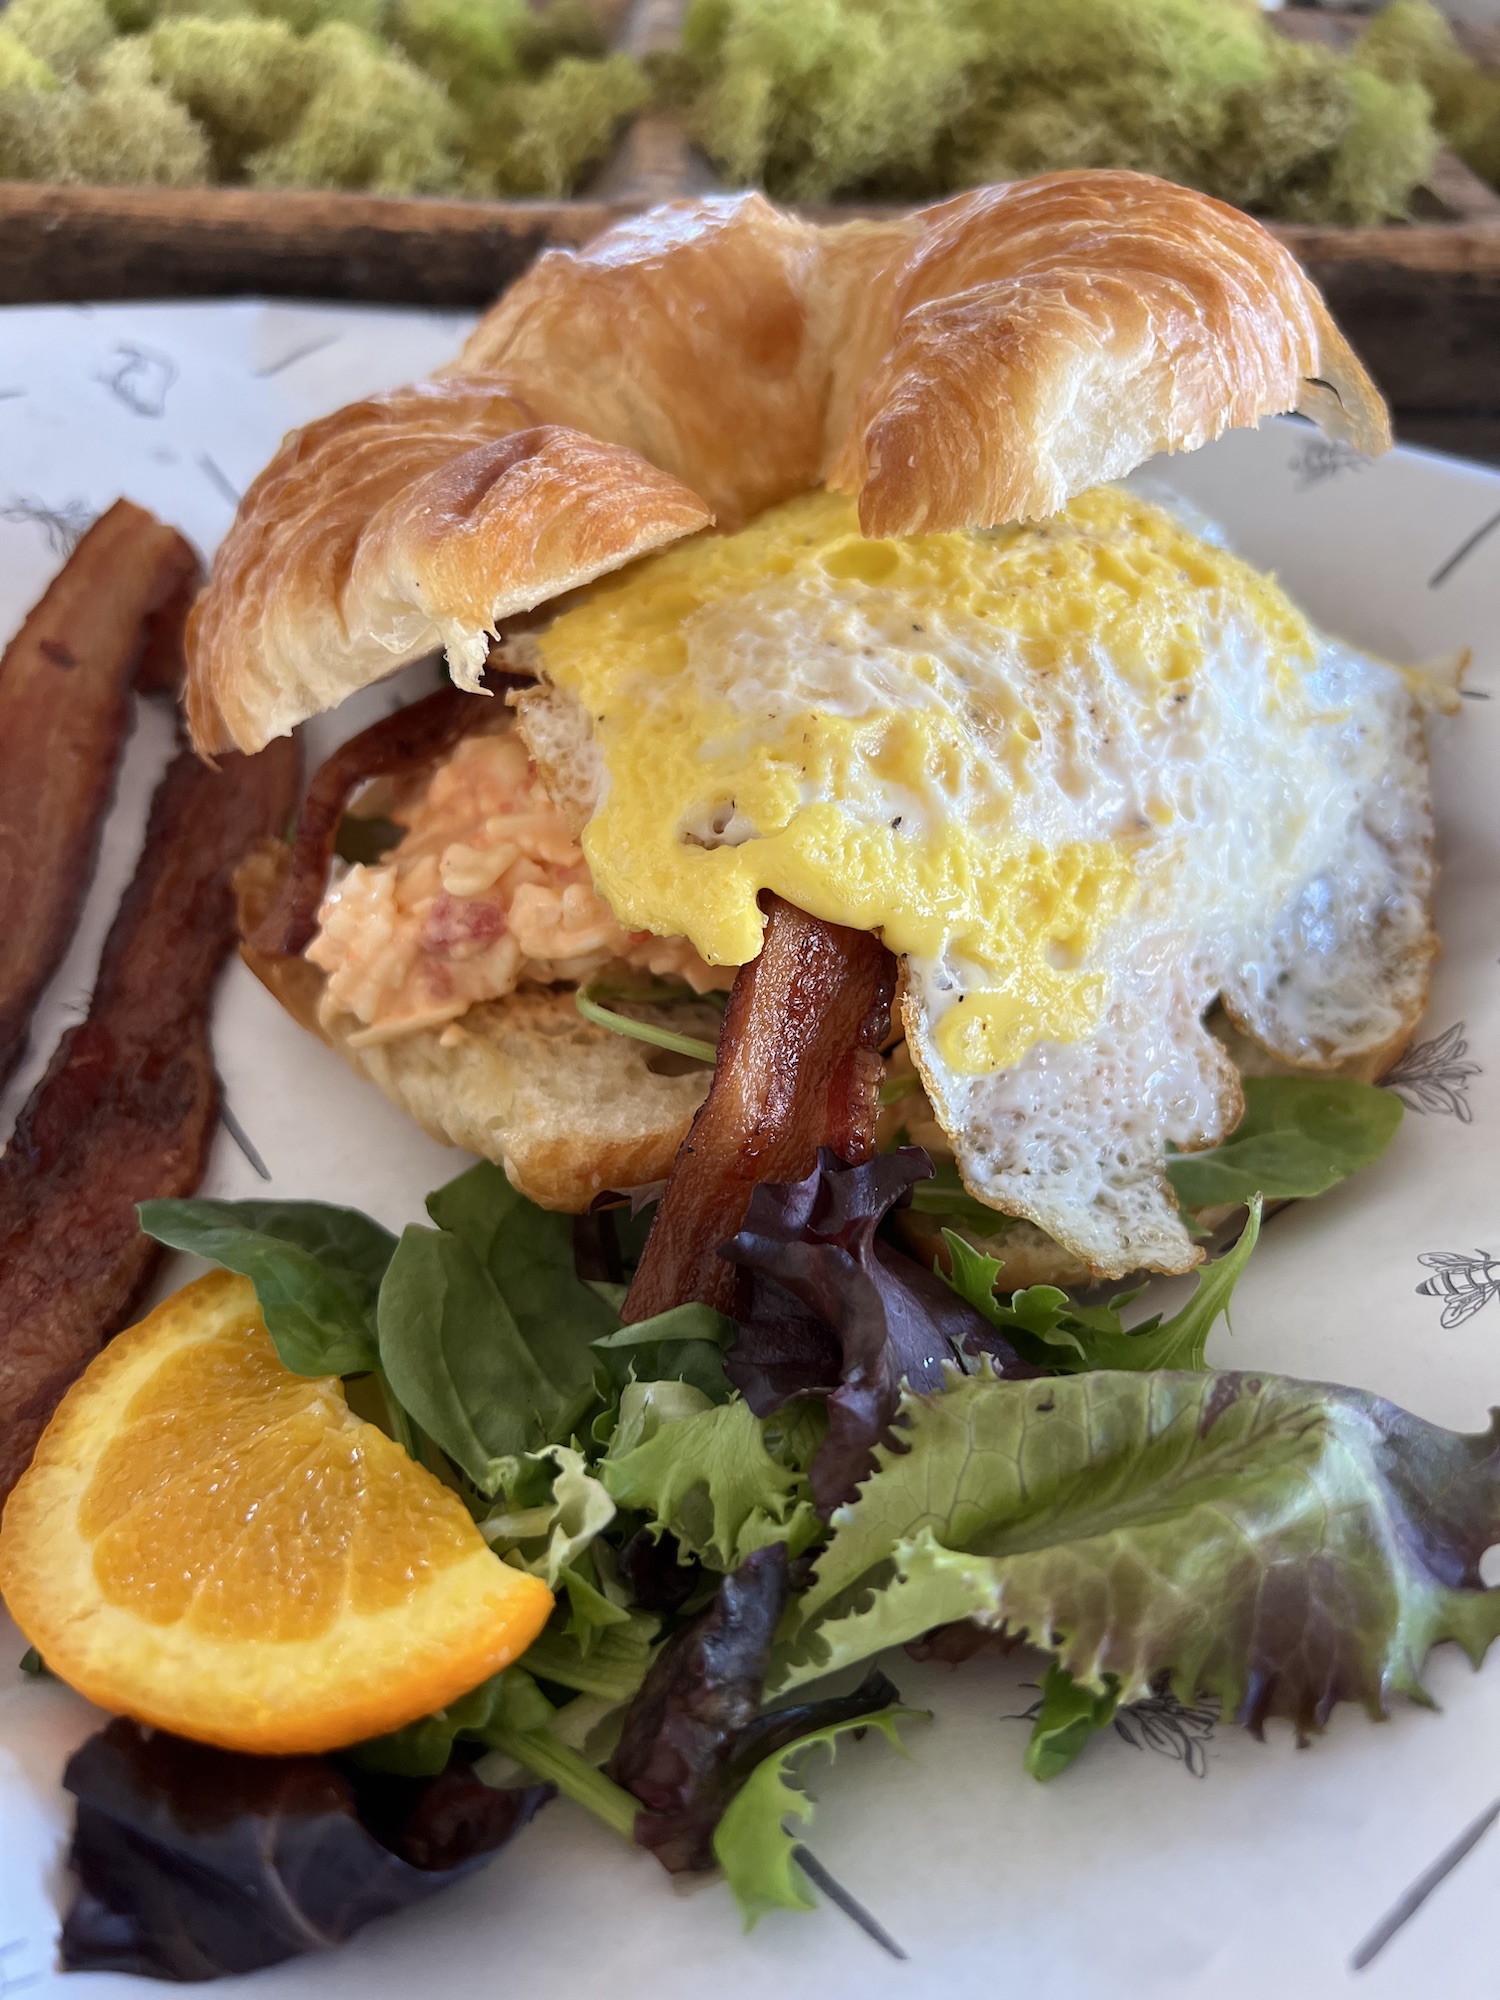 pimento cheese and fried egg on a croissant with orange slice and salad on plate nearby